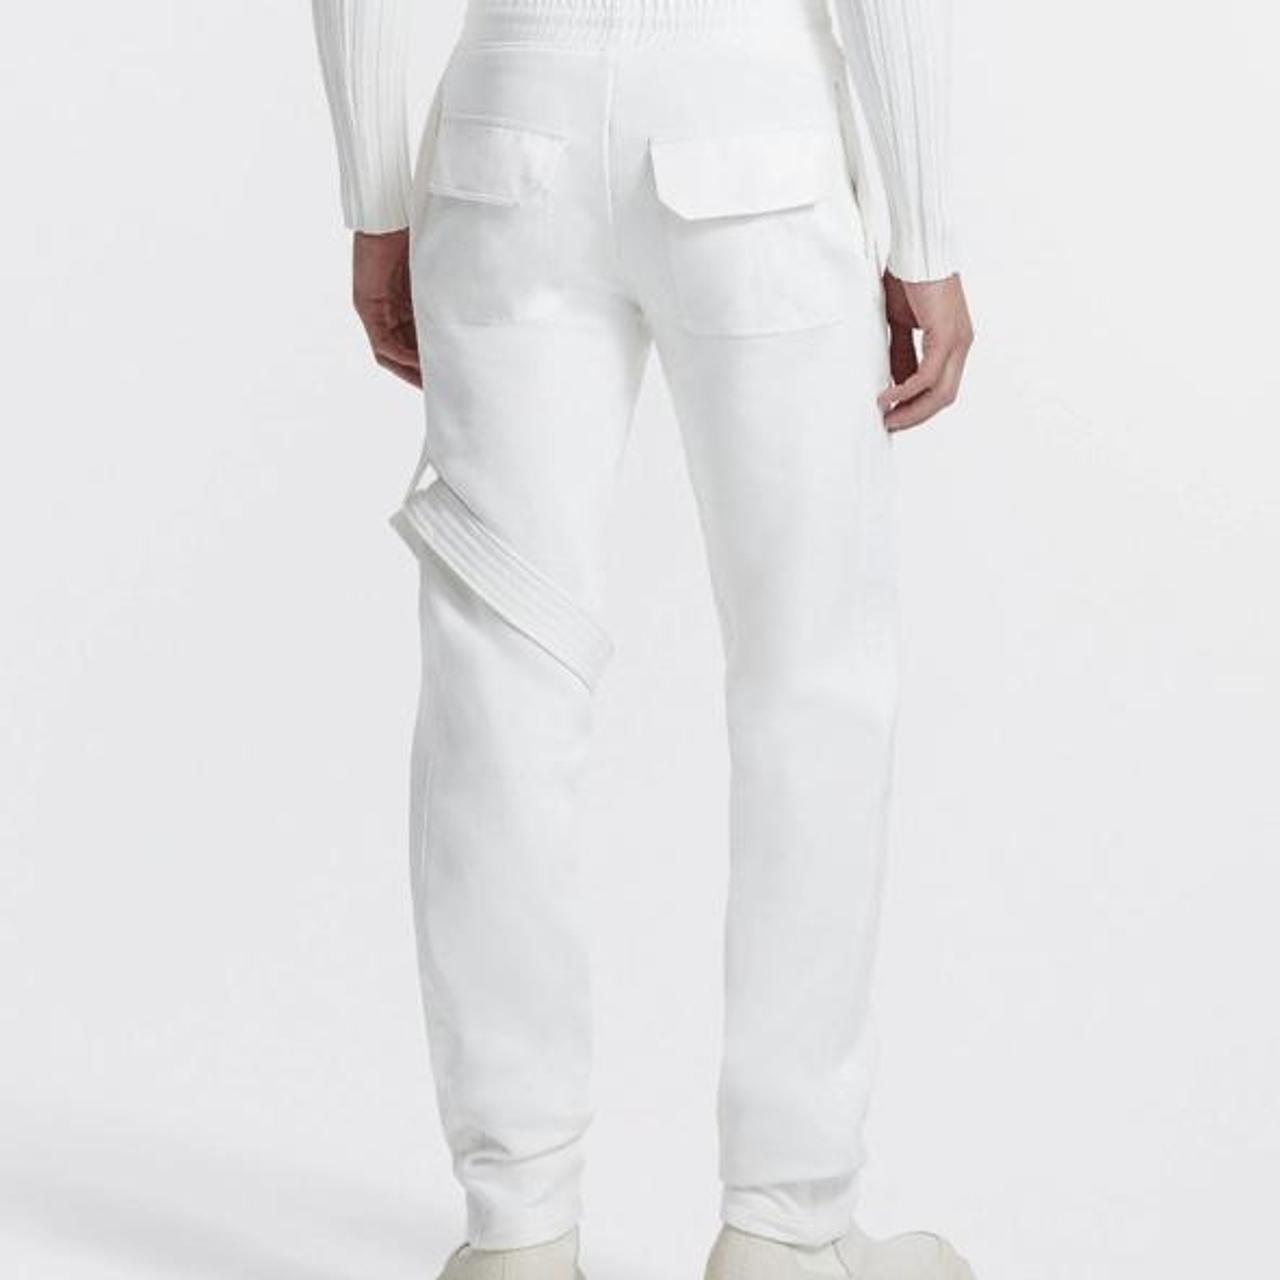 Dion Lee White Harness Sweatpants. Sold out on... - Depop